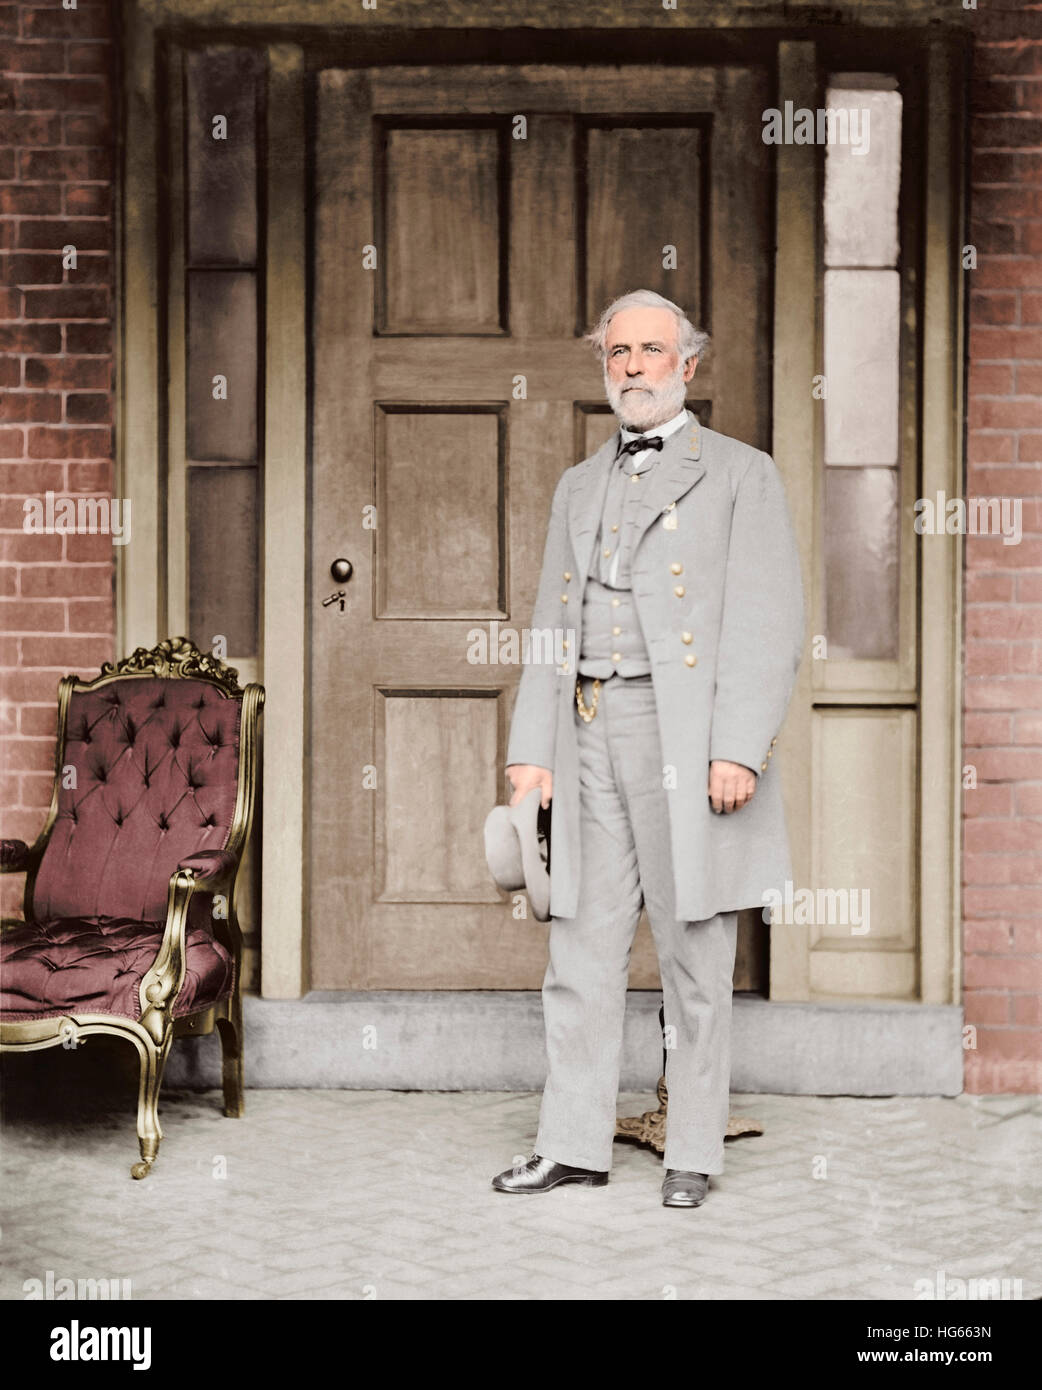 Confederate Army General Robert E. Lee, 1860-1865. Stock Photo